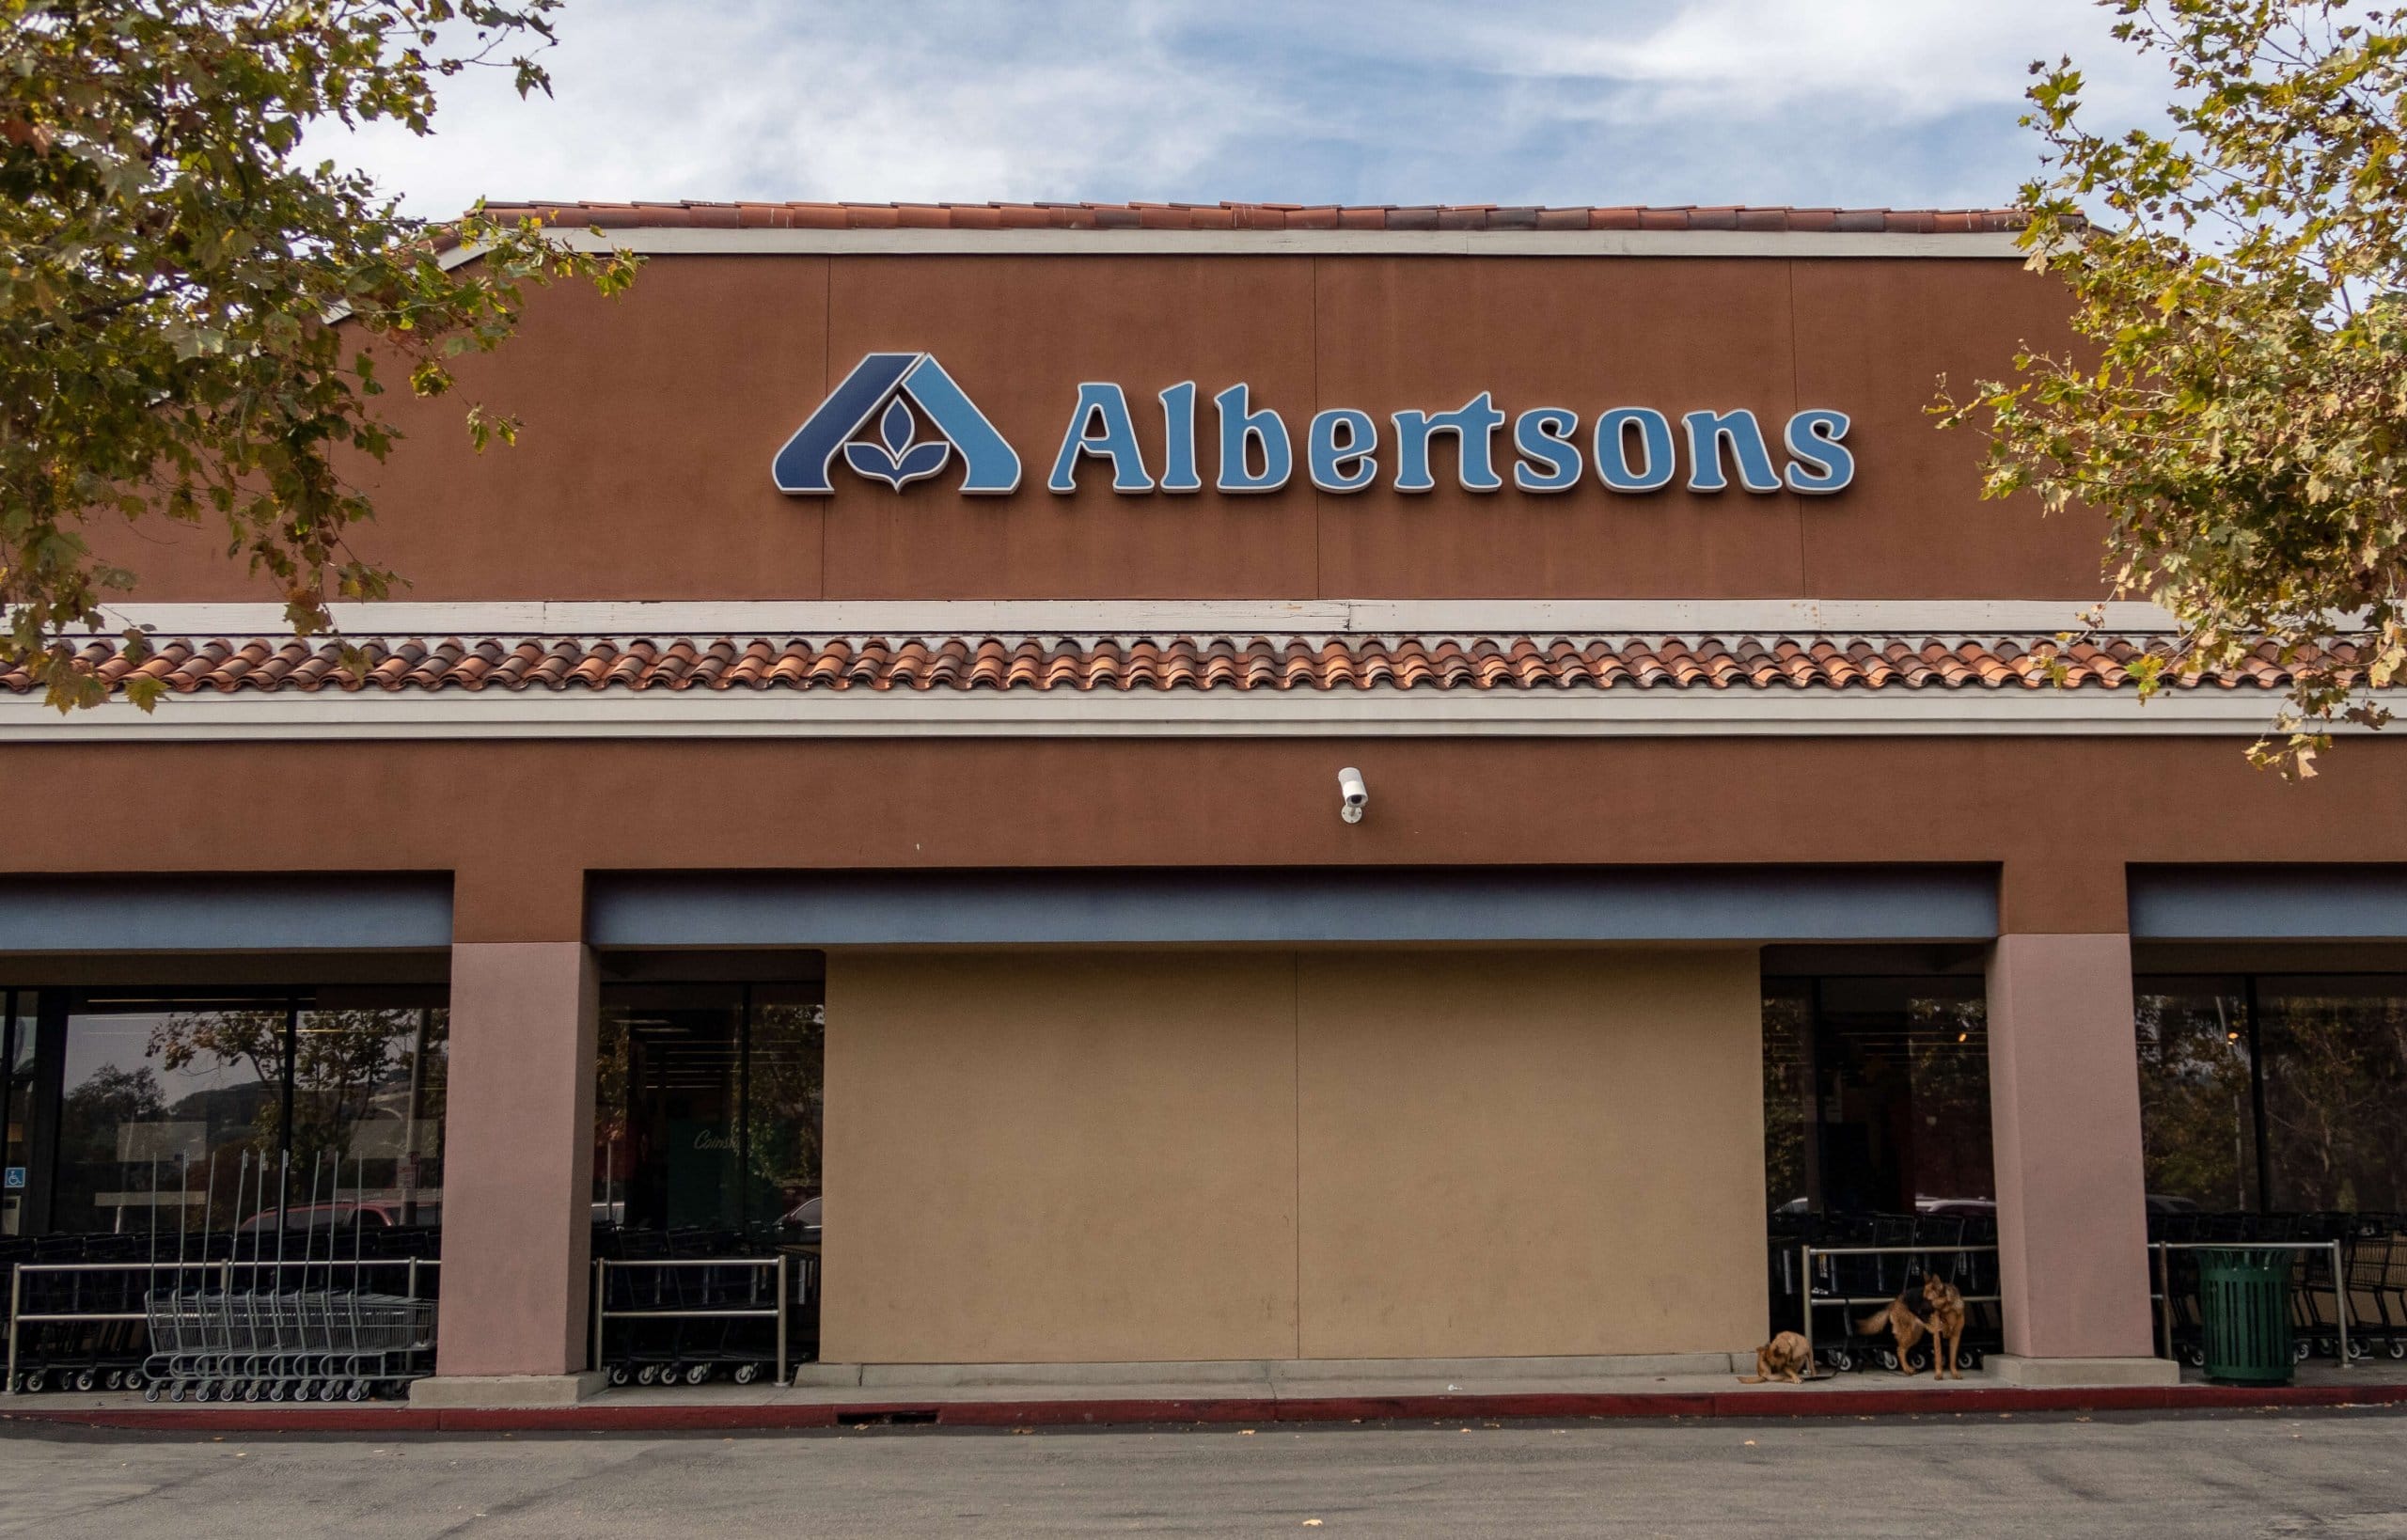 An Albertsons grocery storefront